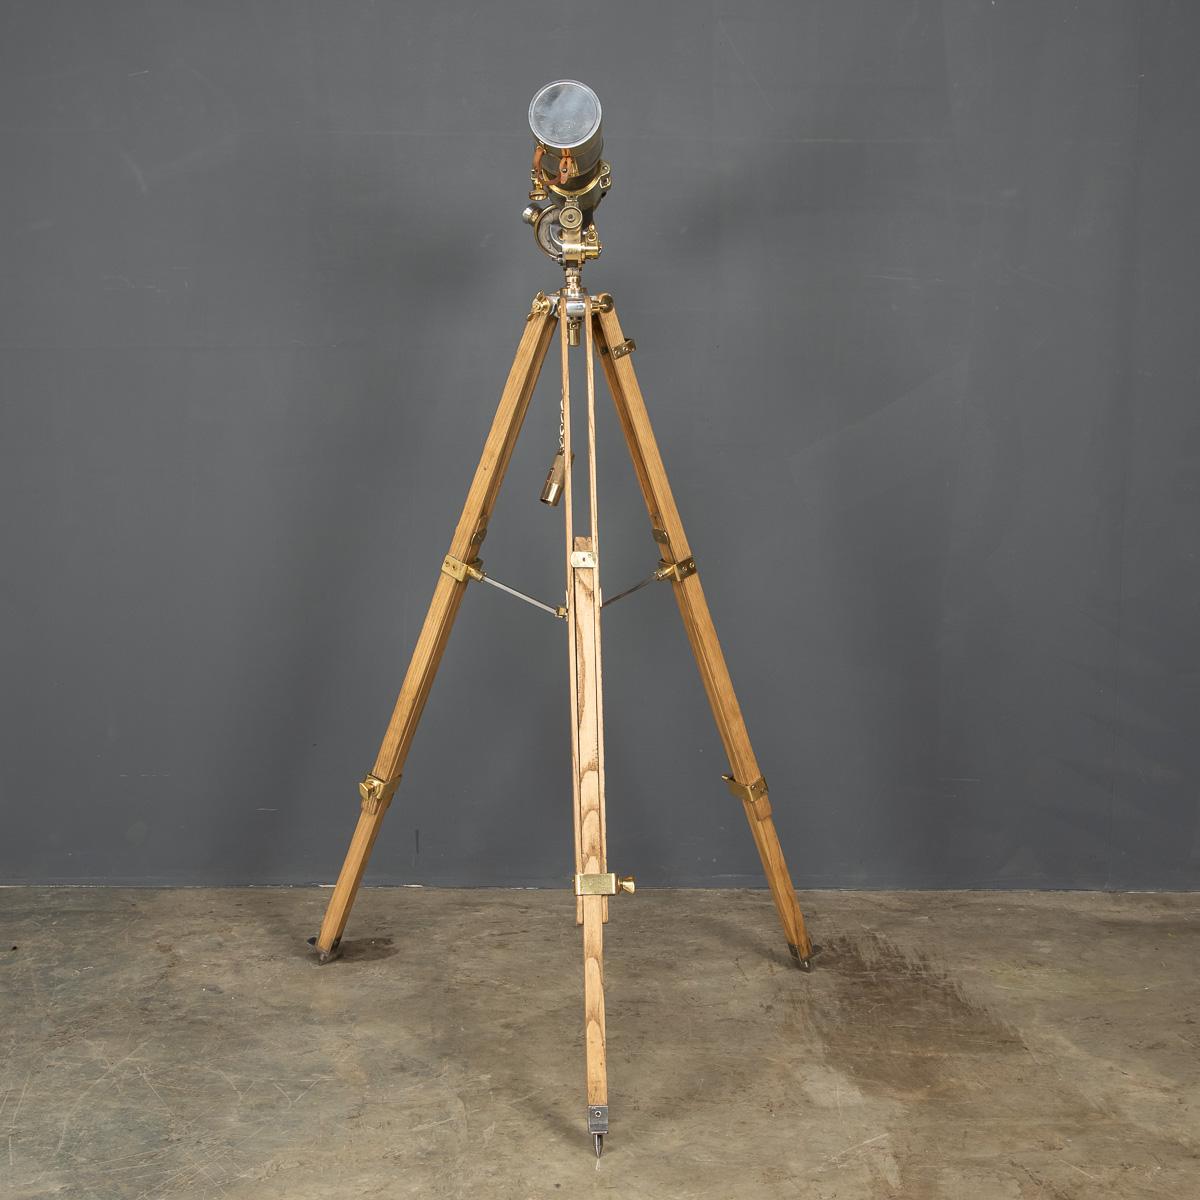 Antique early-20th century French (x15, x23, x30) long range telescope, a very strong observation viewer (30x) for observation at night, comes with its original leather transportation box.

Condition:
In great condition - no